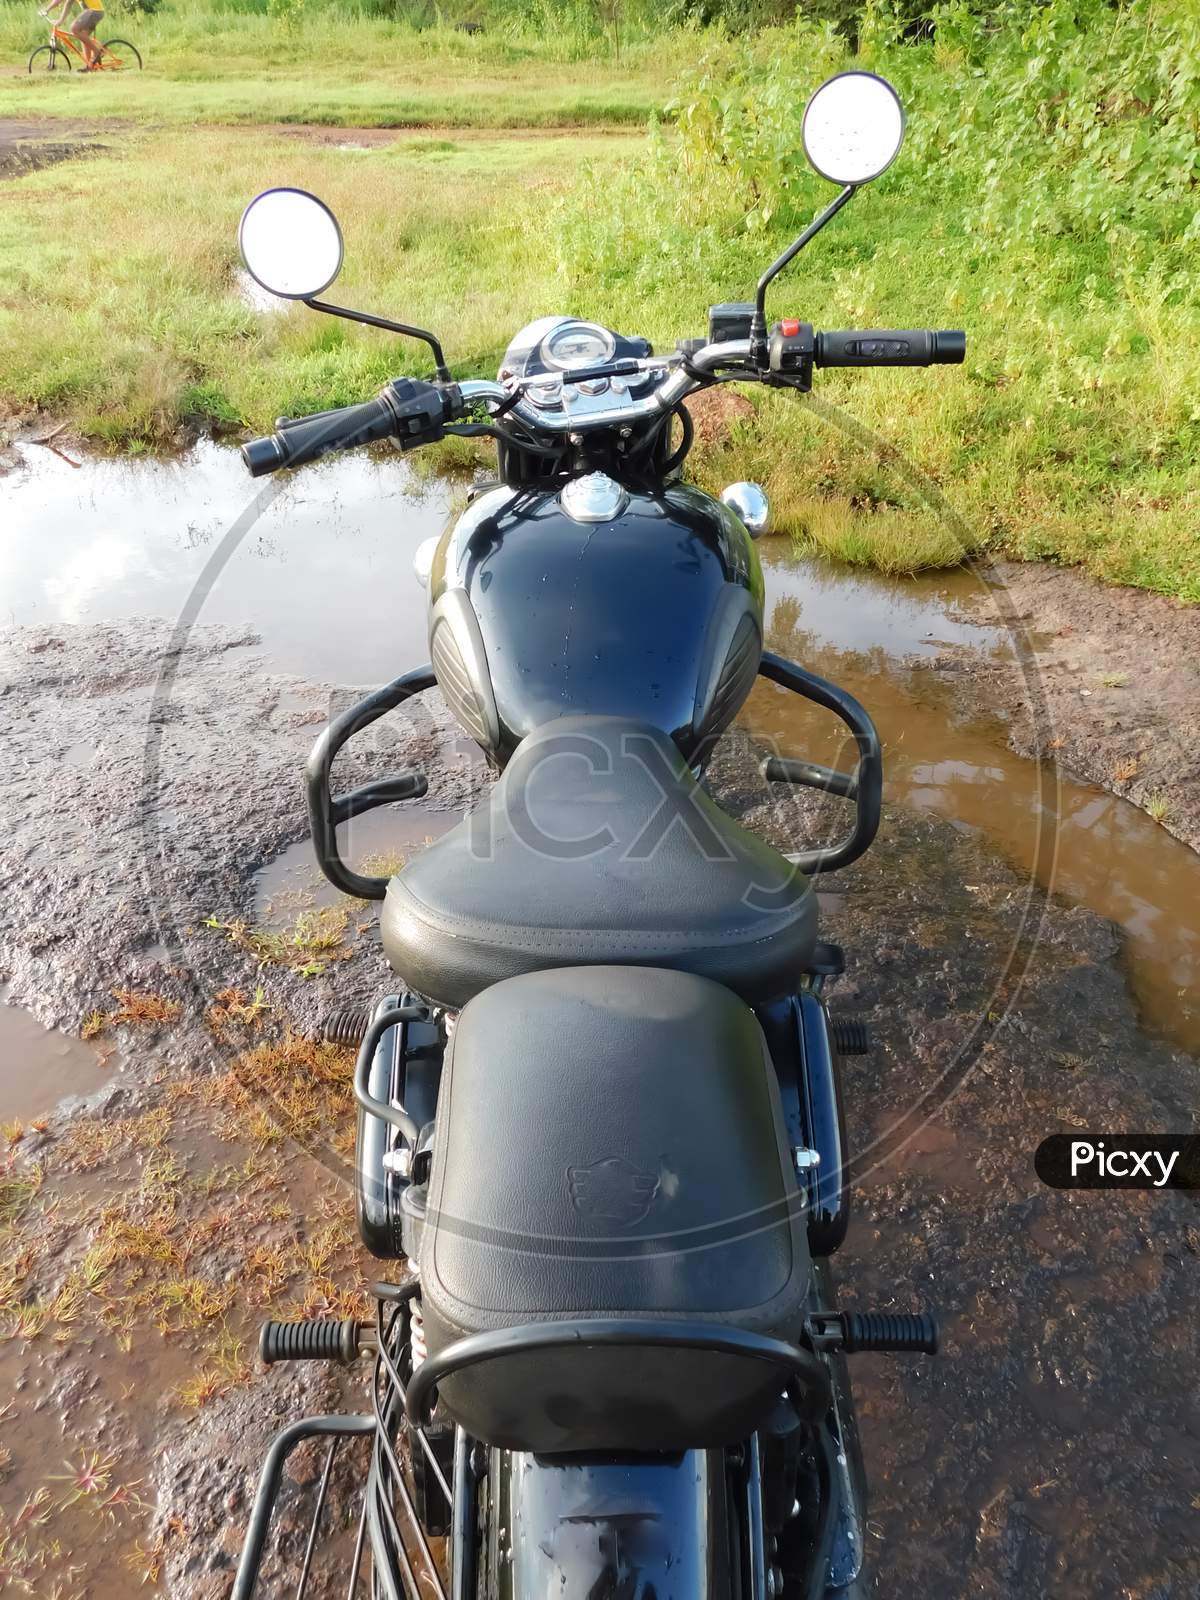 View Of A Motorcycle Parked In A Rock Surface